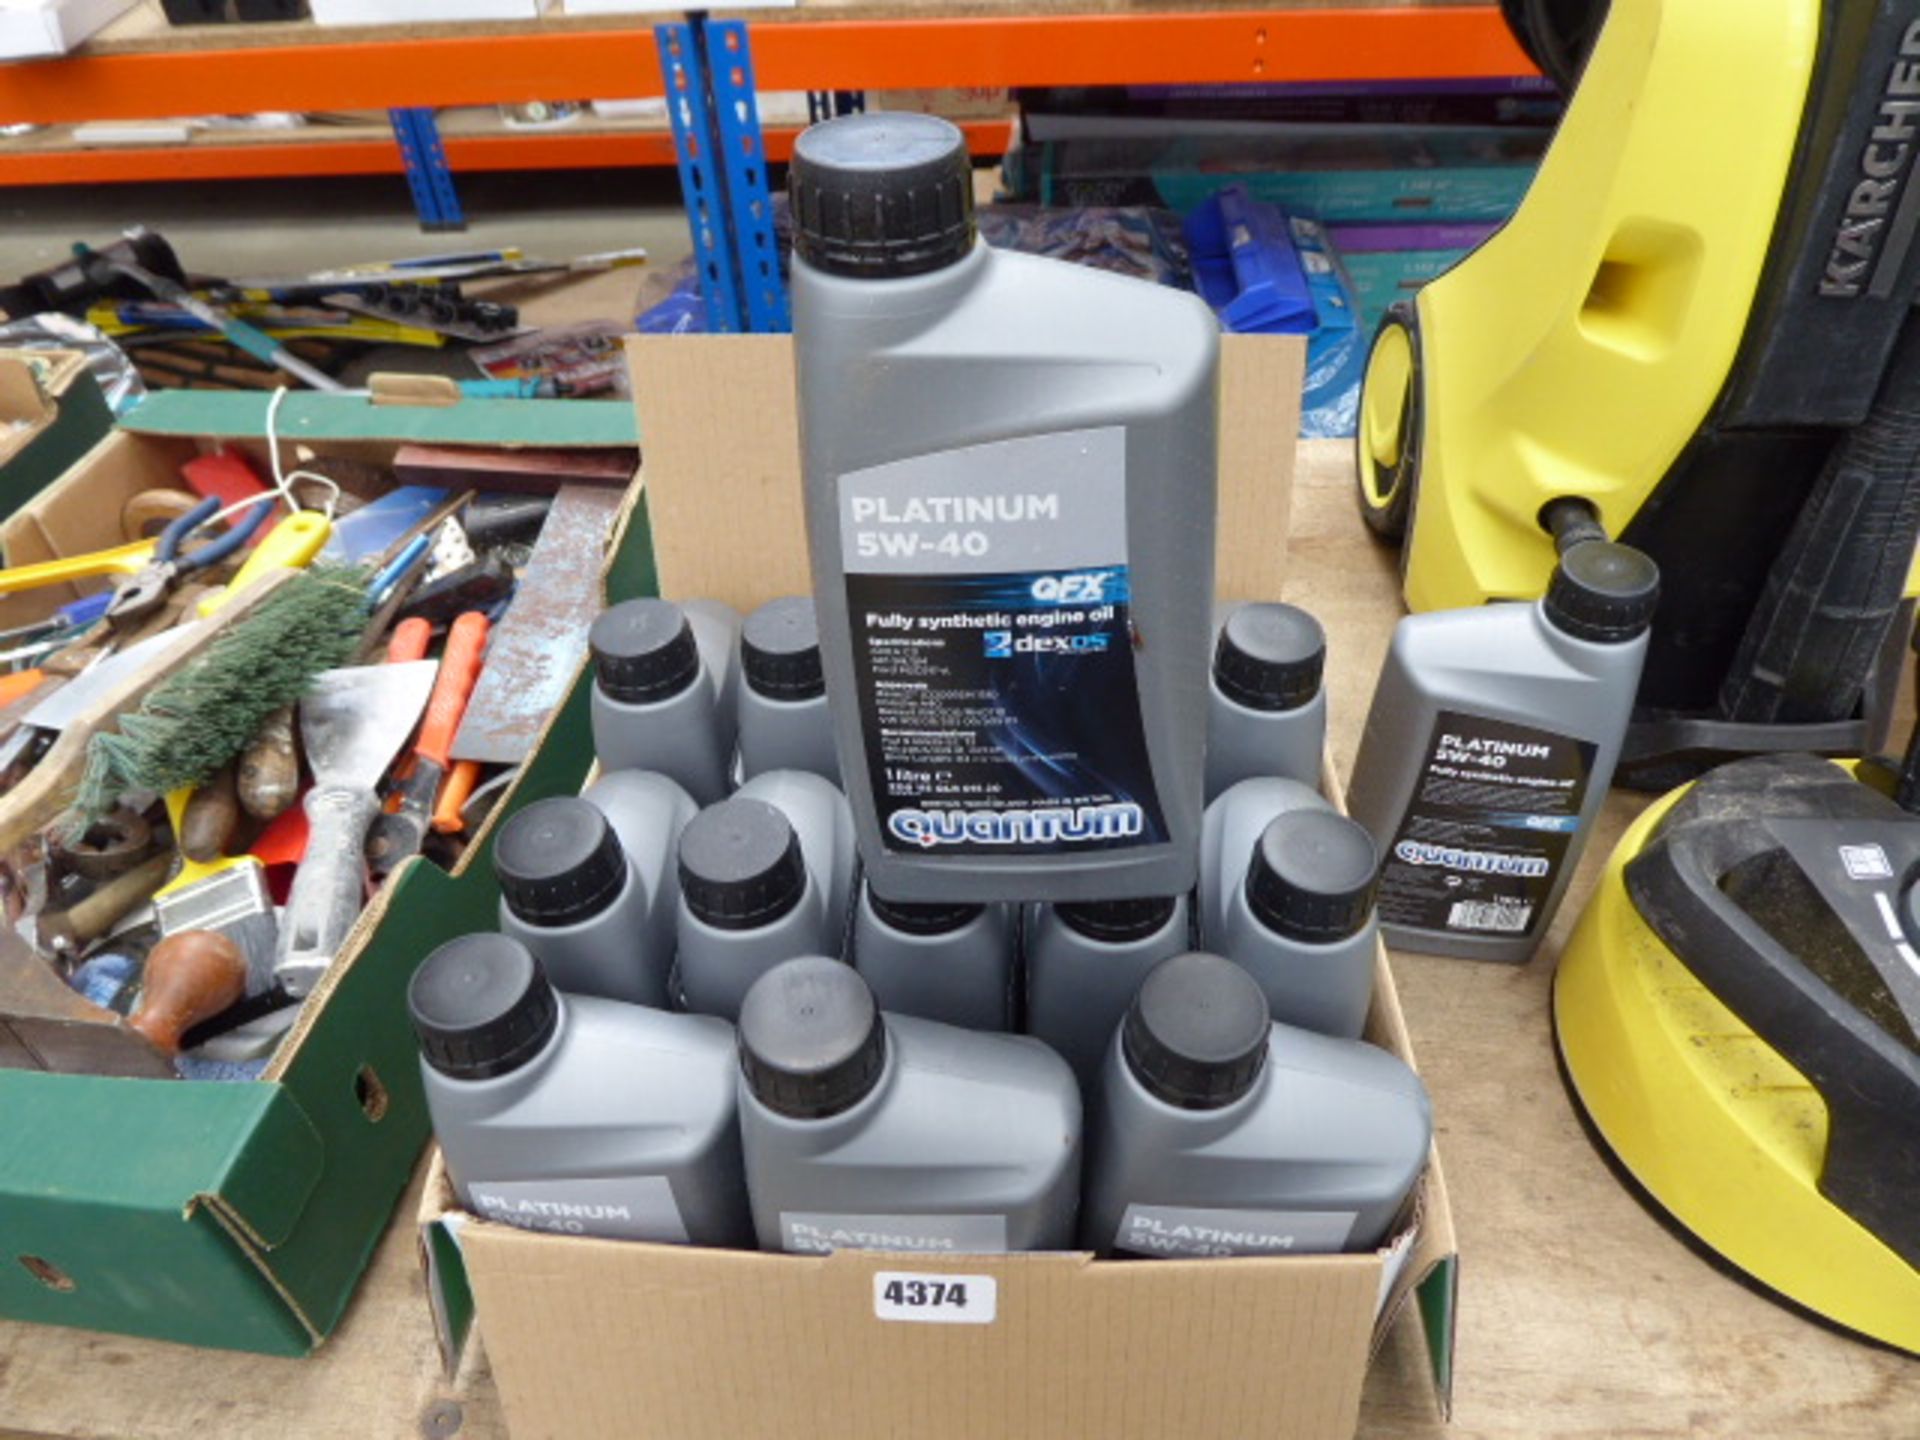 Approx 15 tubs of 5W40 synthetic engine oil